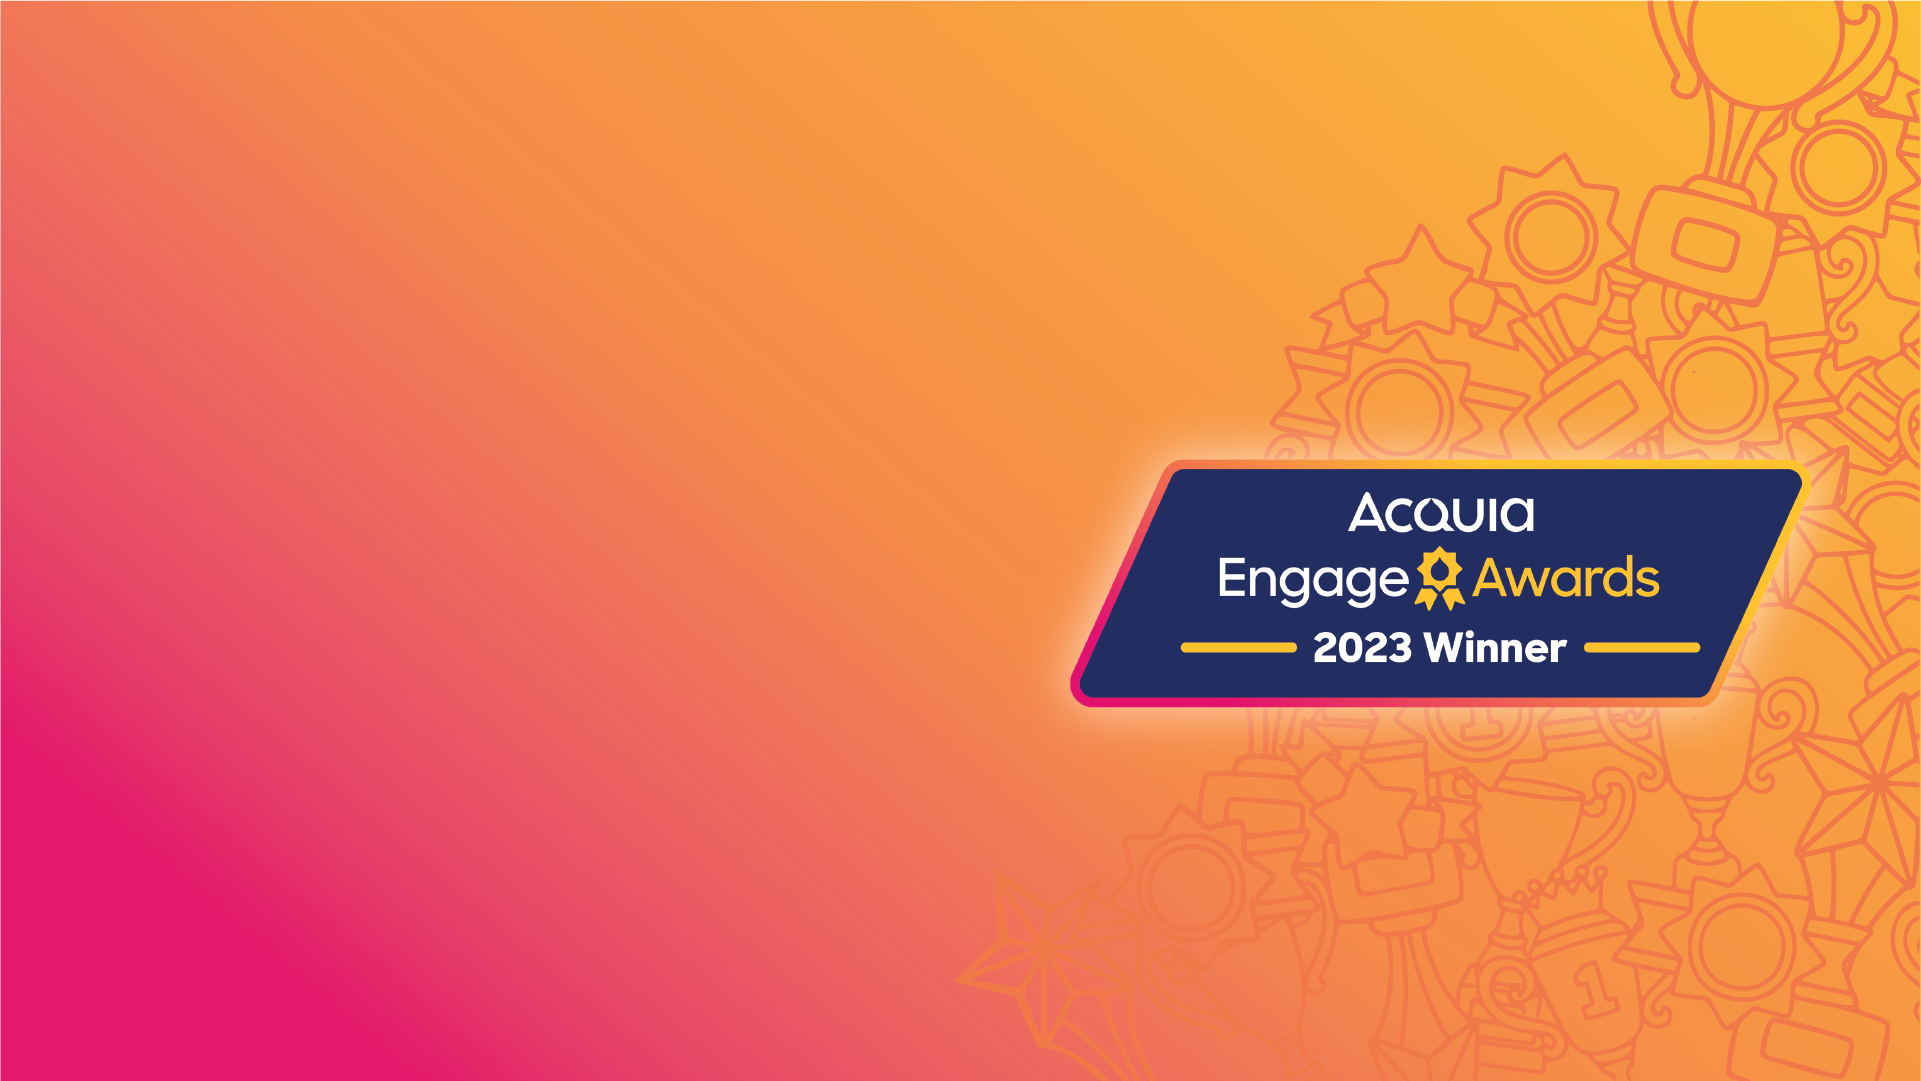 Acquia Engage Awards 2023 - INSEAD